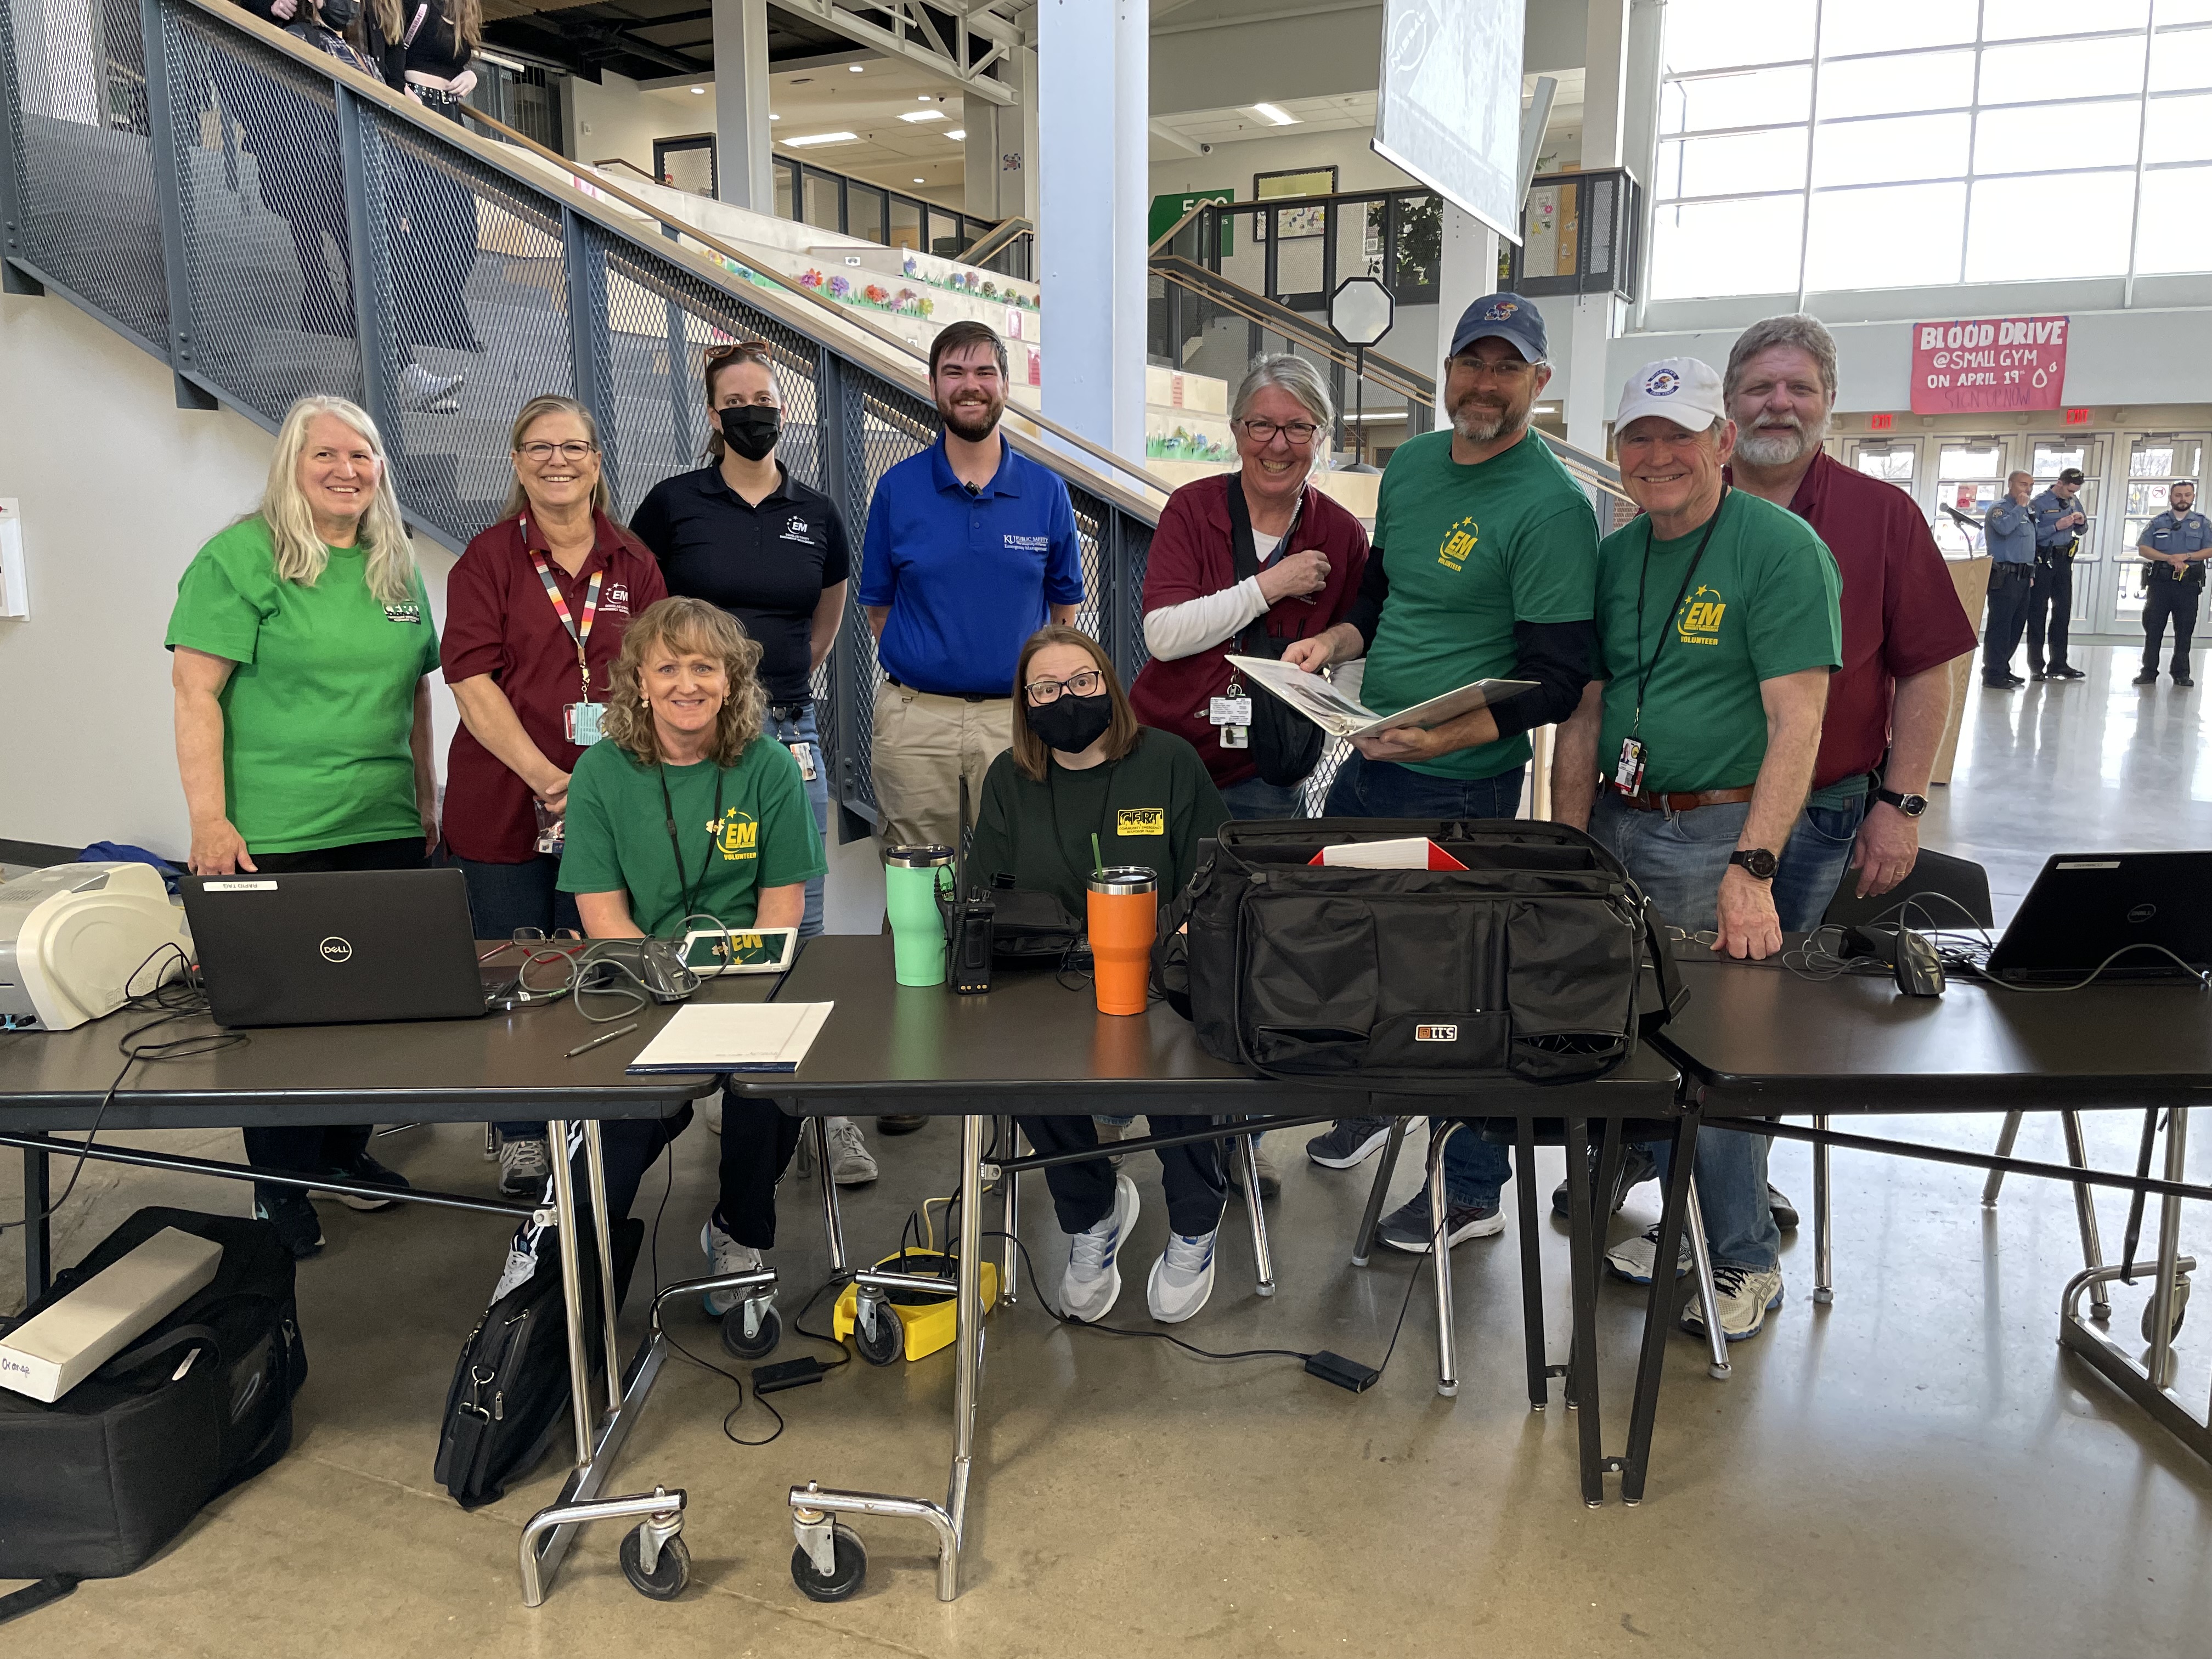 Emergency Management Volunteers at Final Four 2022